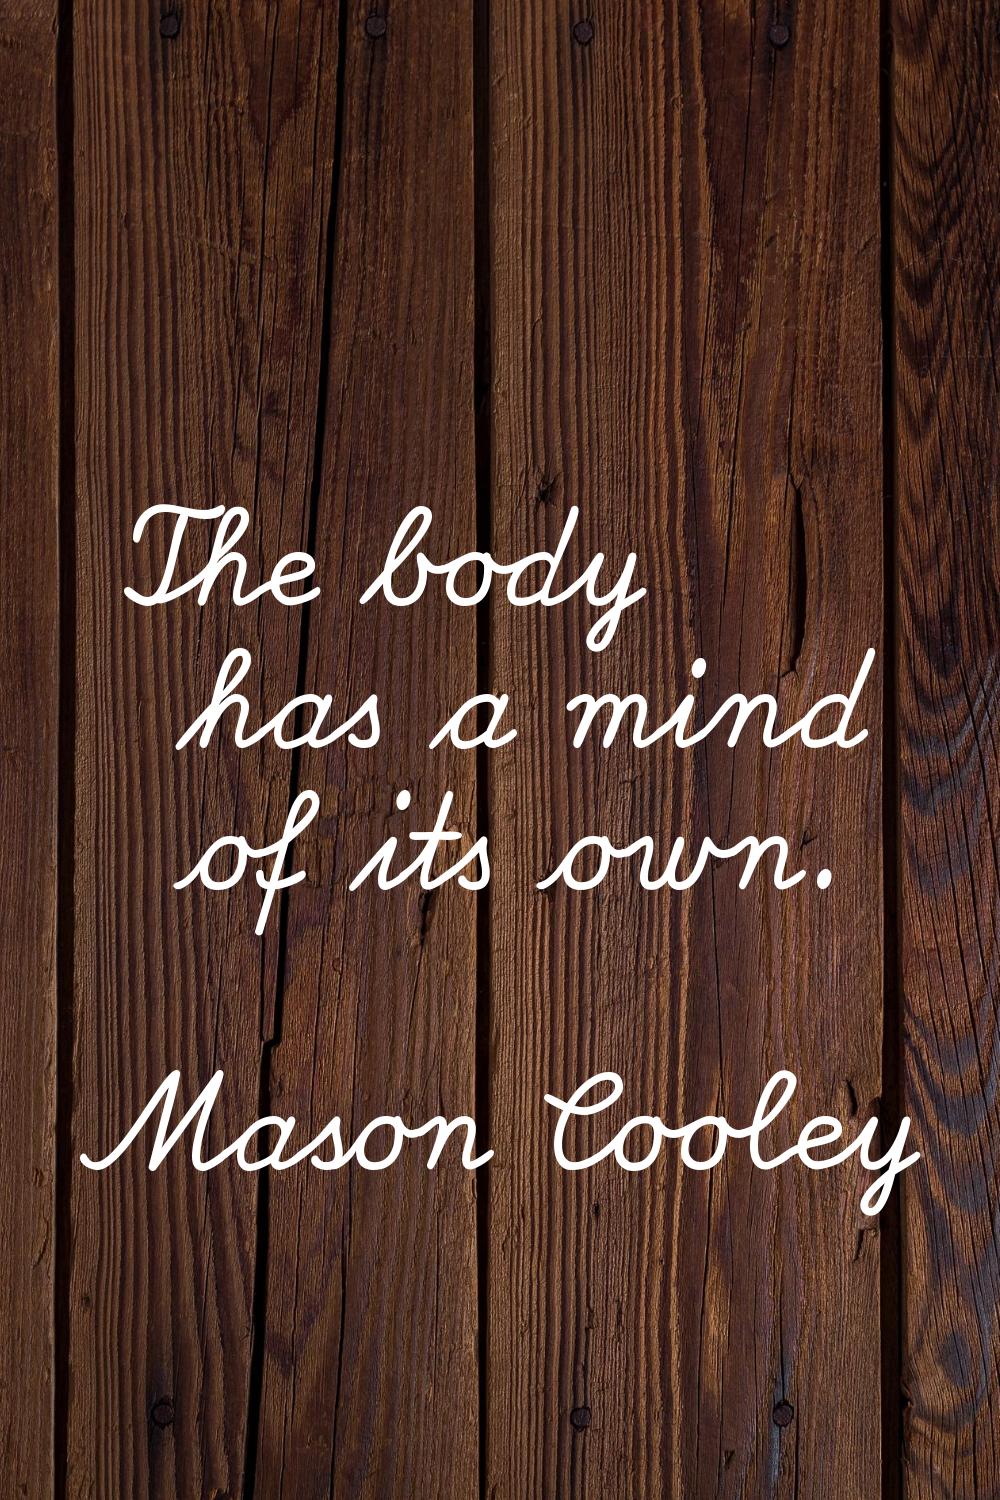 The body has a mind of its own.